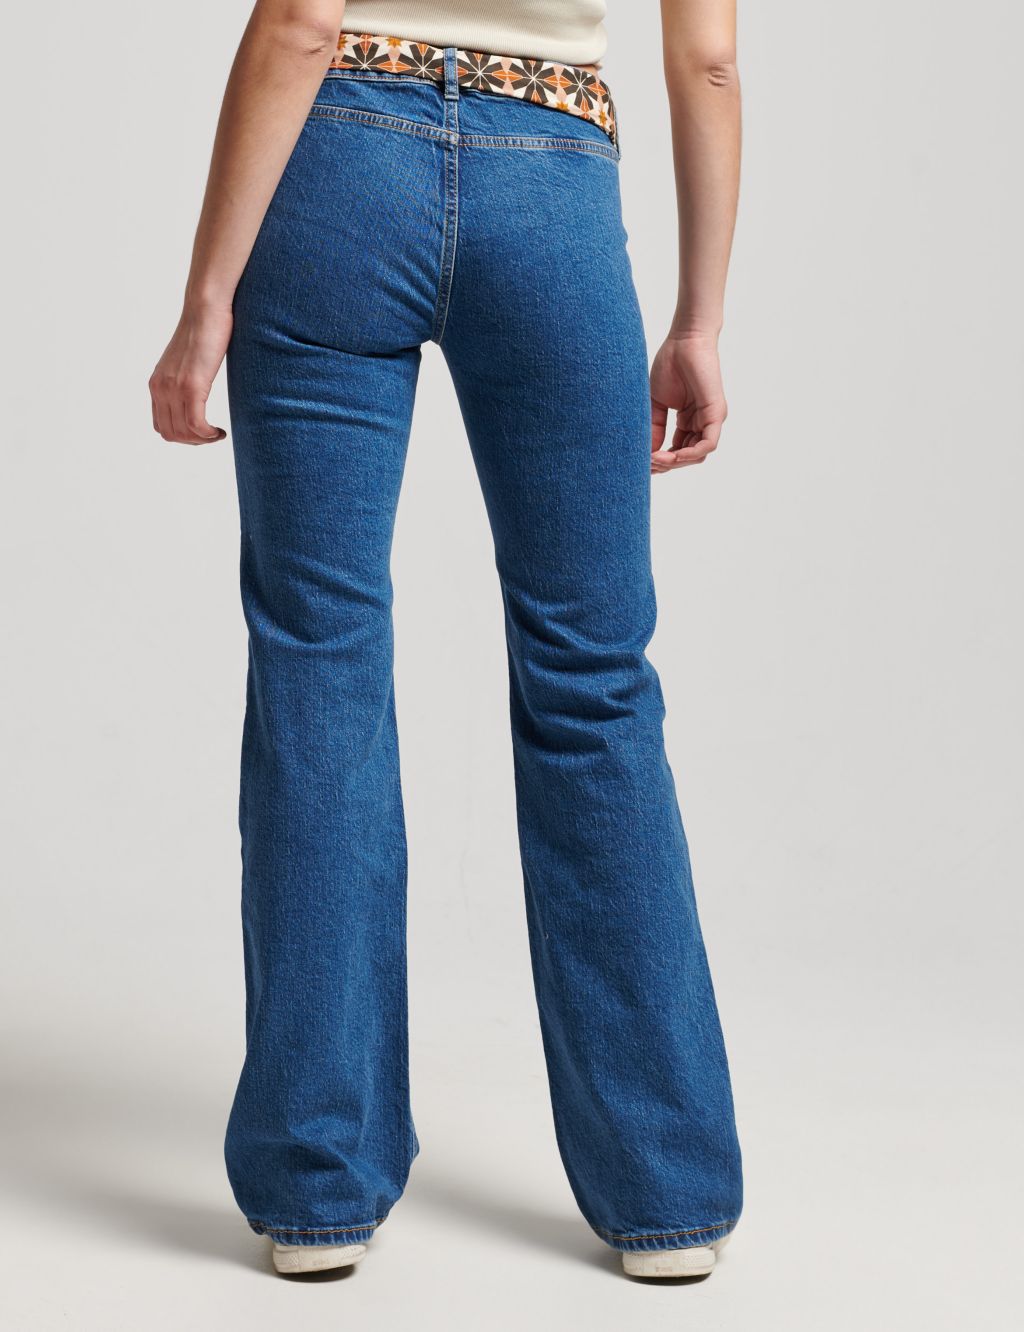 Button Front Flared Jeans image 4